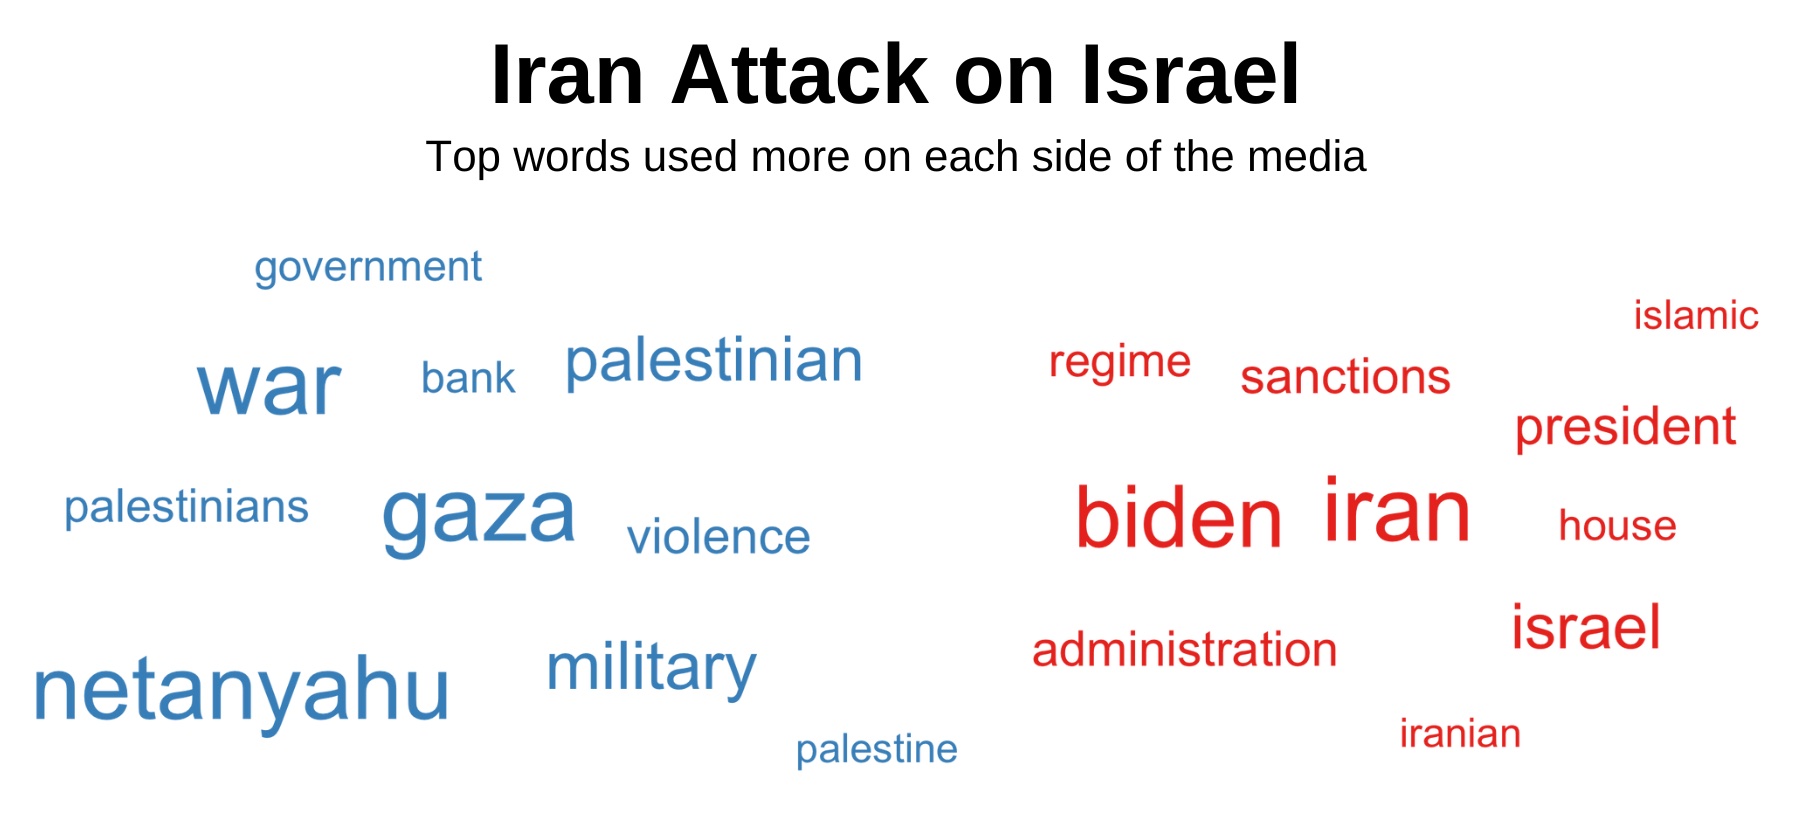 Top words about Iran's attack on Israel used more on each side of the media.